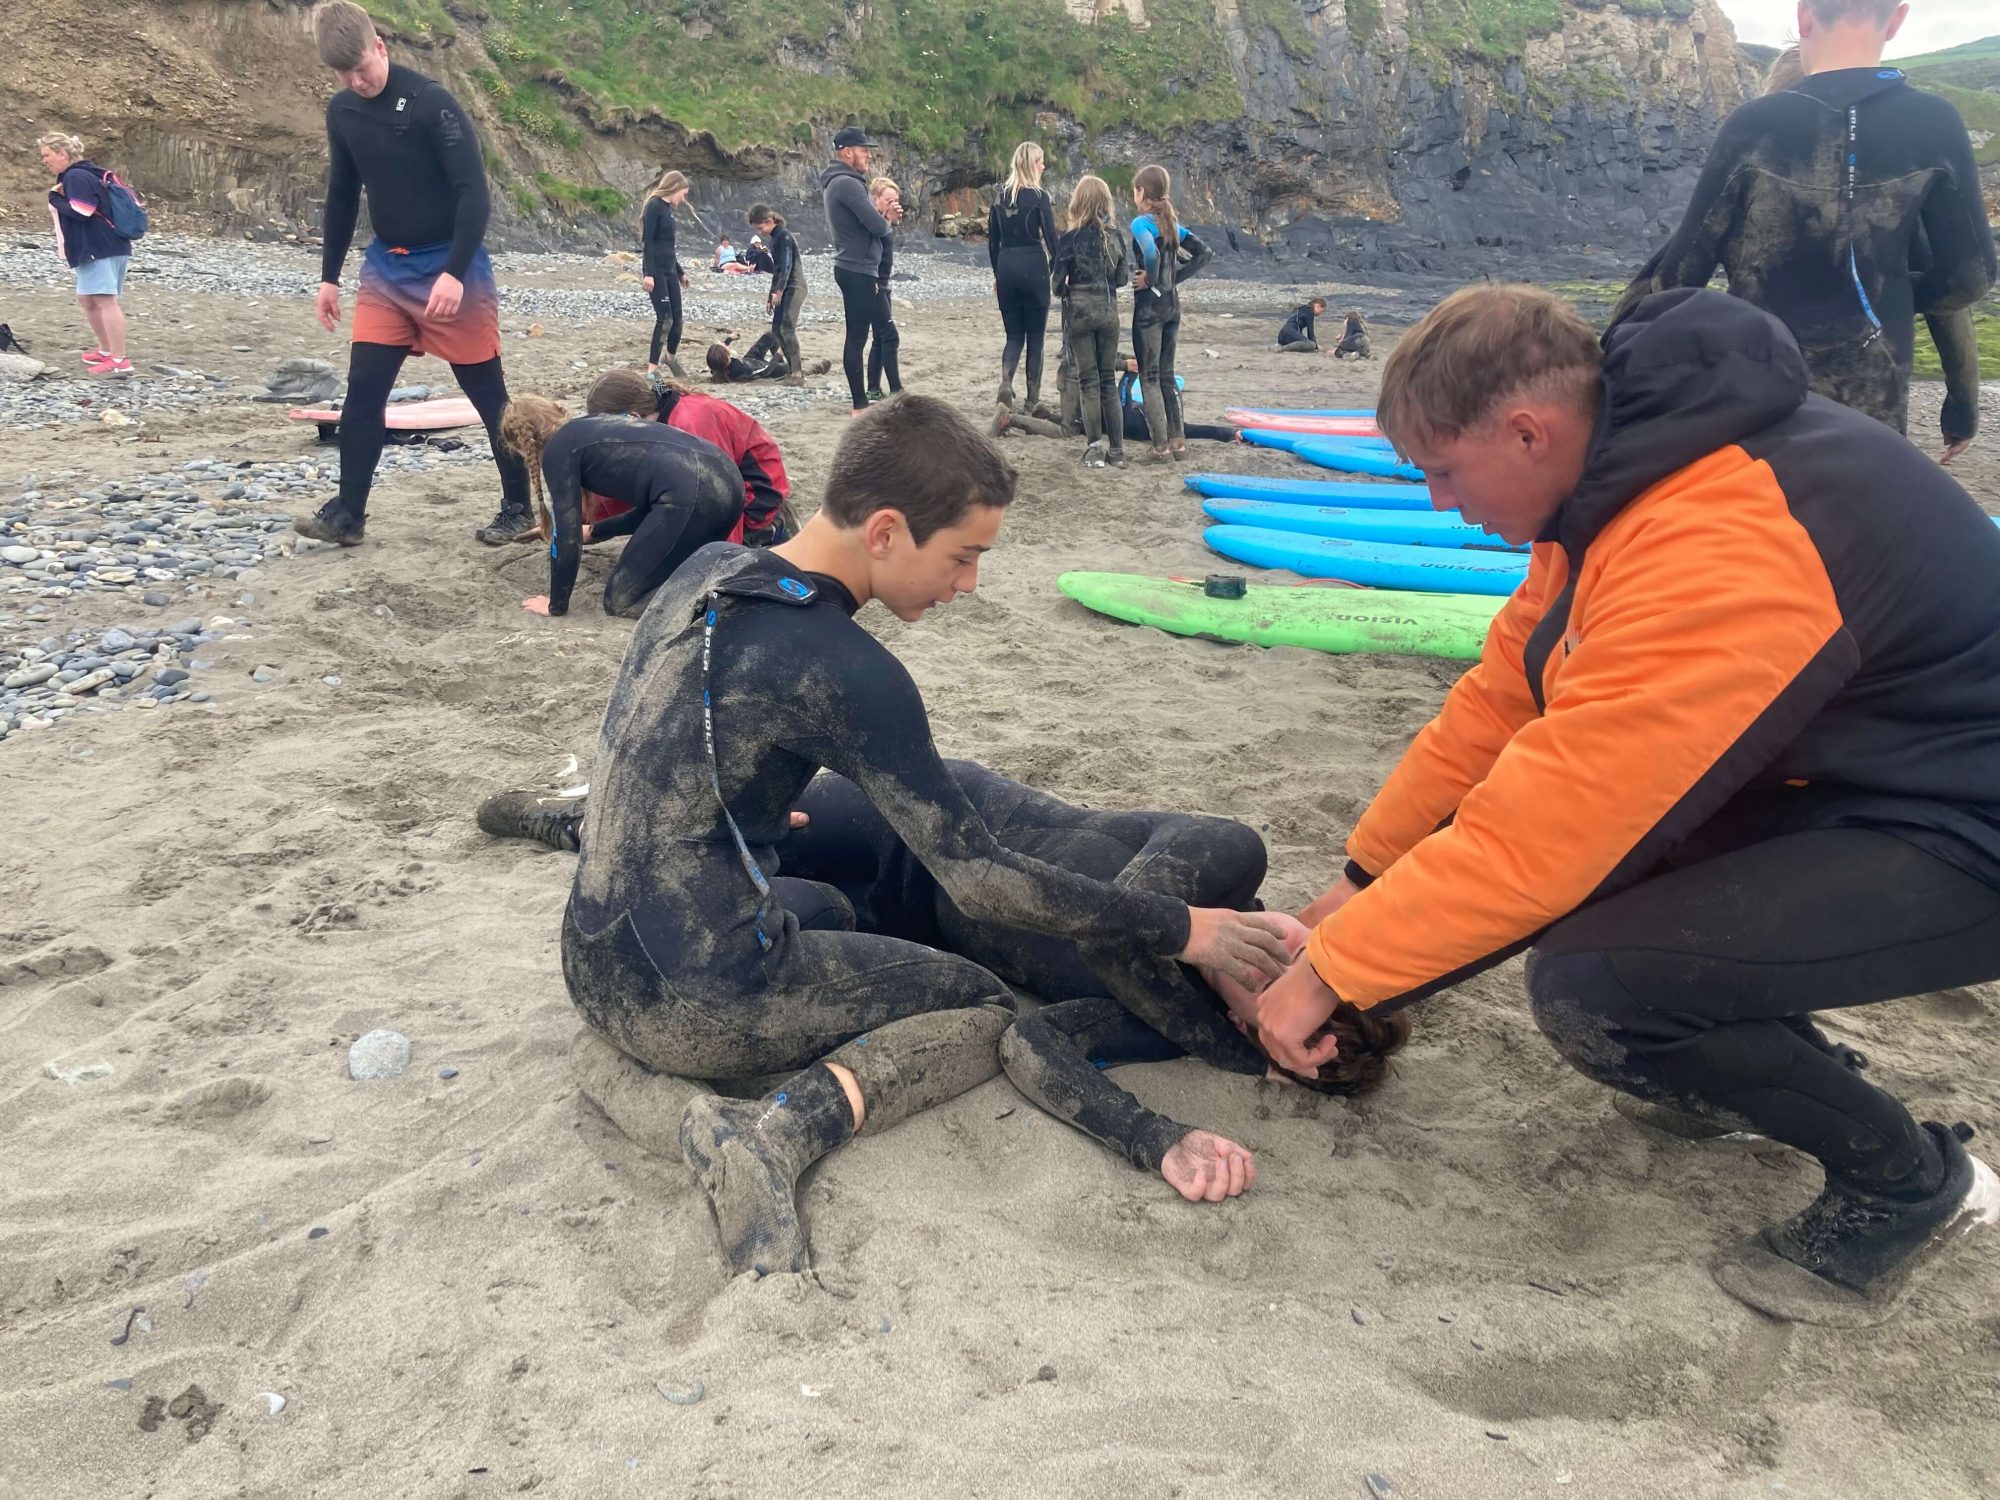 school residential activity breaks pembrokeshire, school activity breaks muuk adventures, school activity breaks wales, school activity breaks brecon beacons, muuk adventures kids adventures, things to do with kids st davids, things to do with kids pembrokeshire